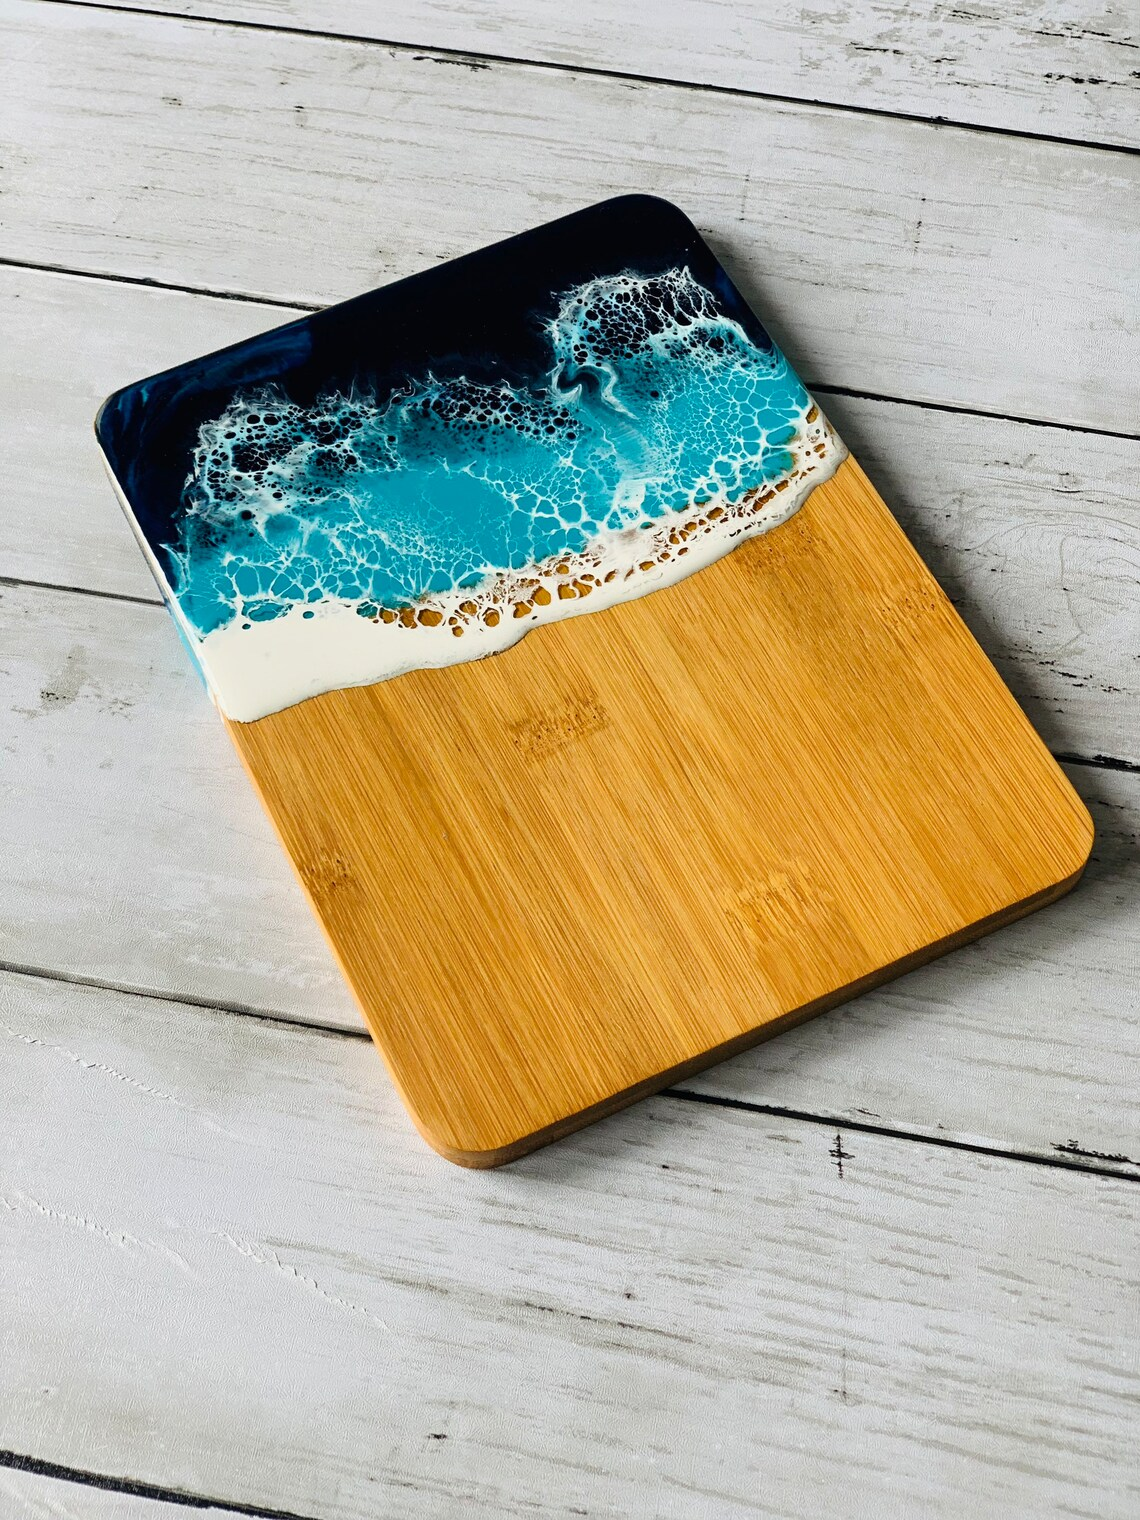 Bamboo Lotus Serving Board, Pretty Serving Boards